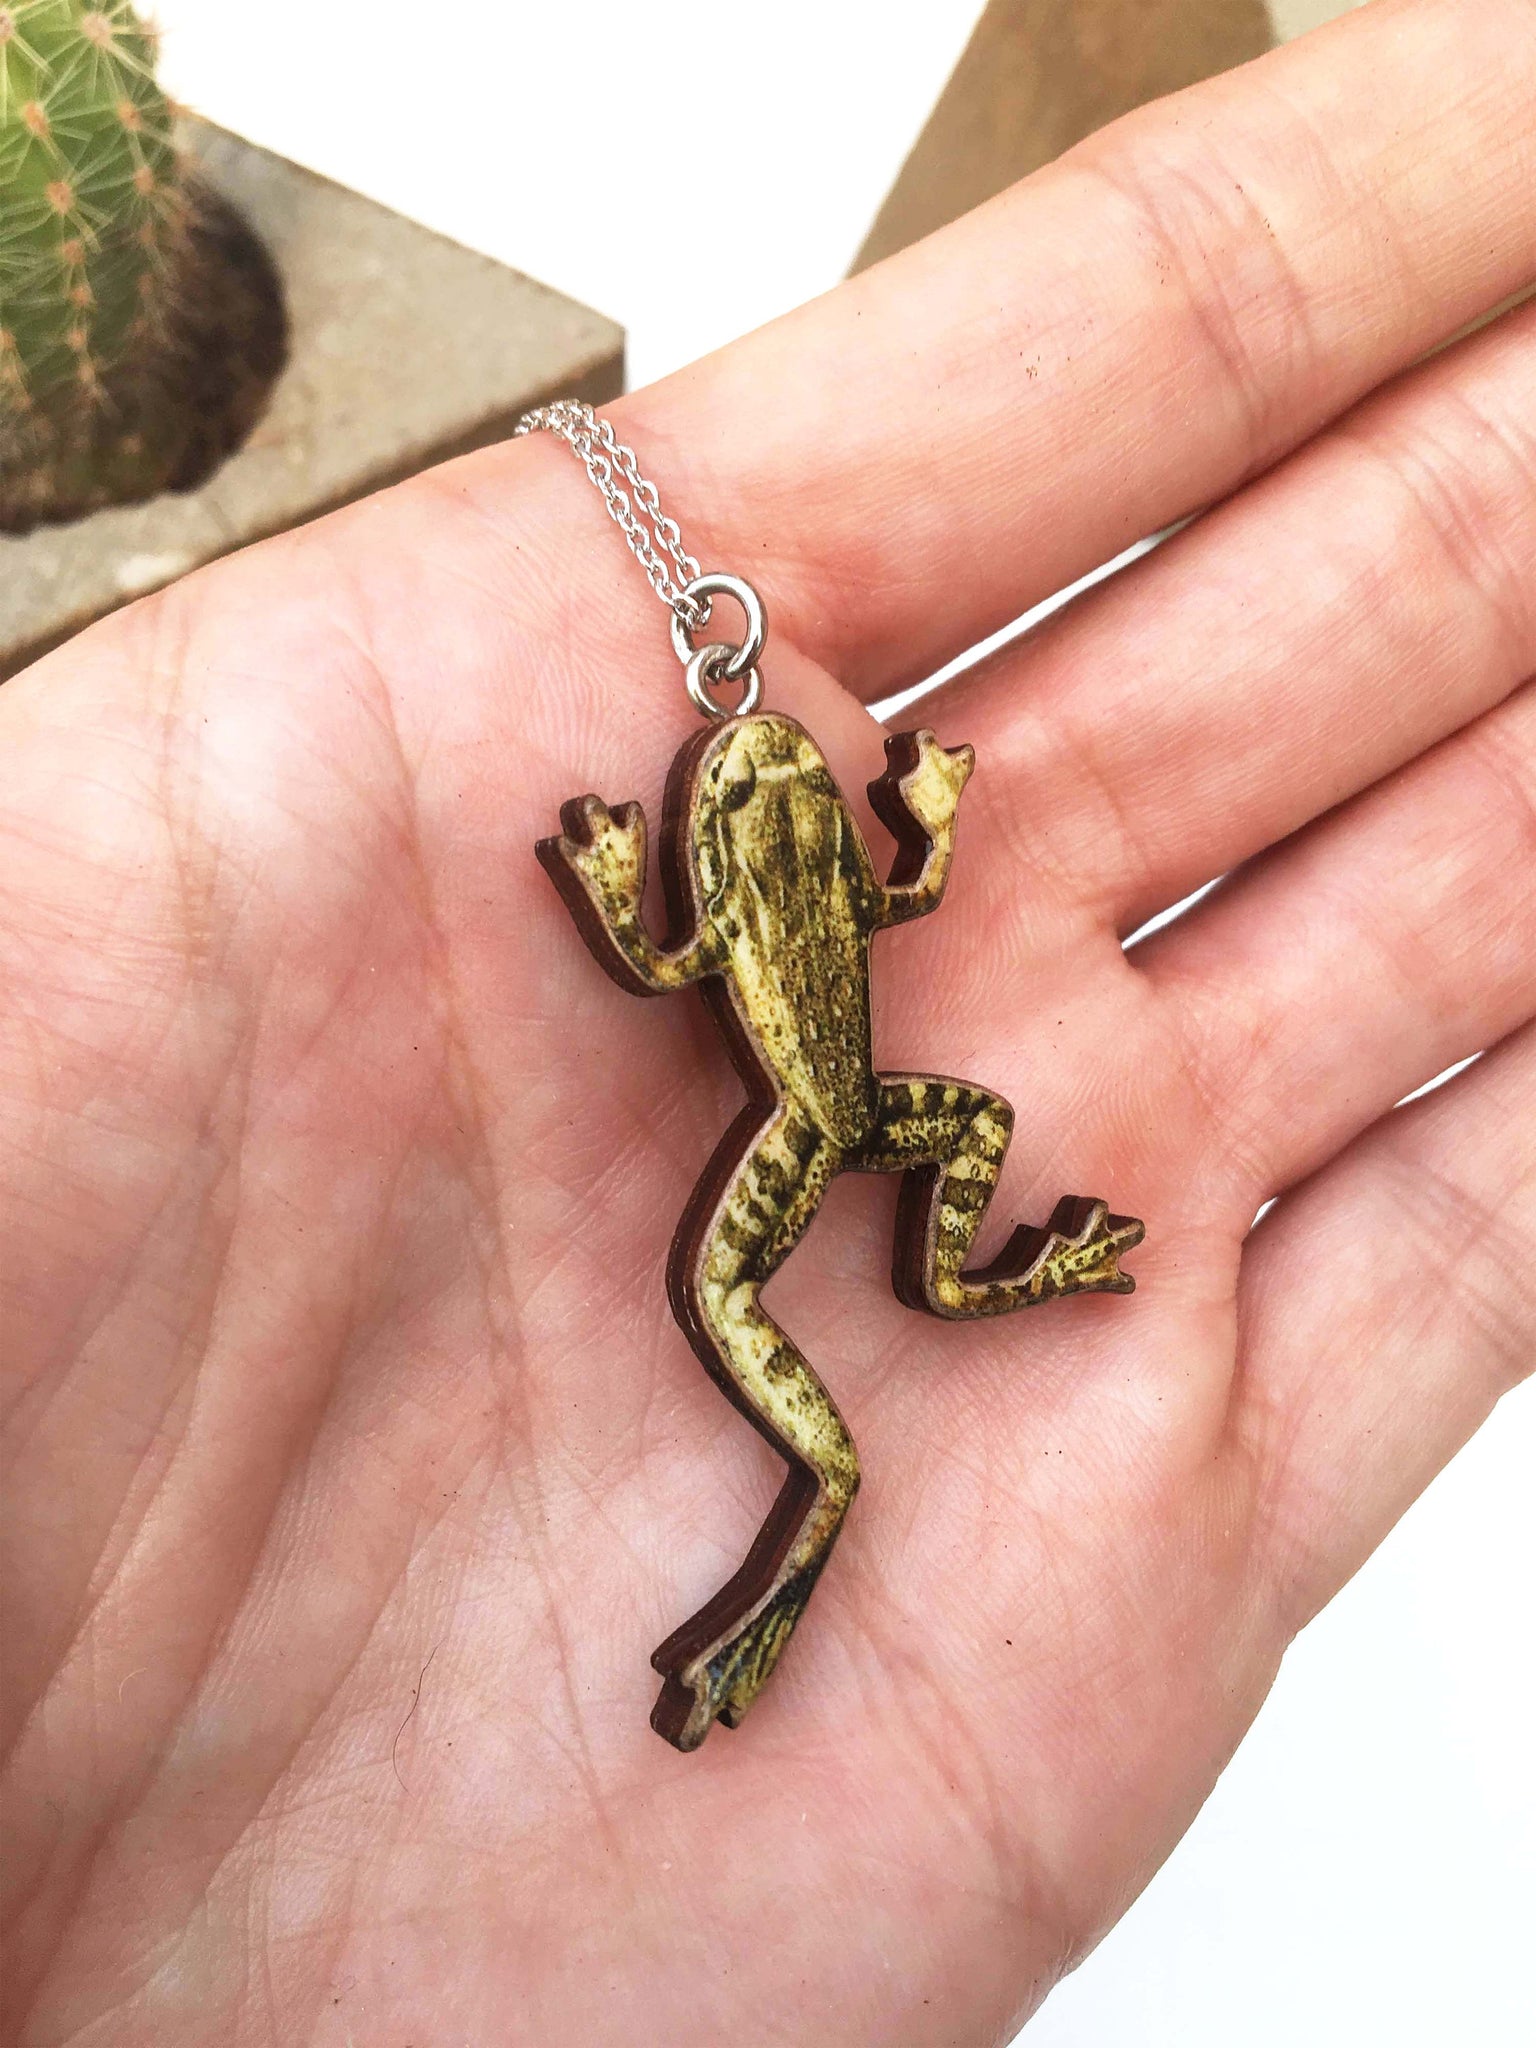 Vintage David Webb Frog Necklace and Estate Jewelry | Pampillonia Jewelers  | Estate and Designer Jewelry